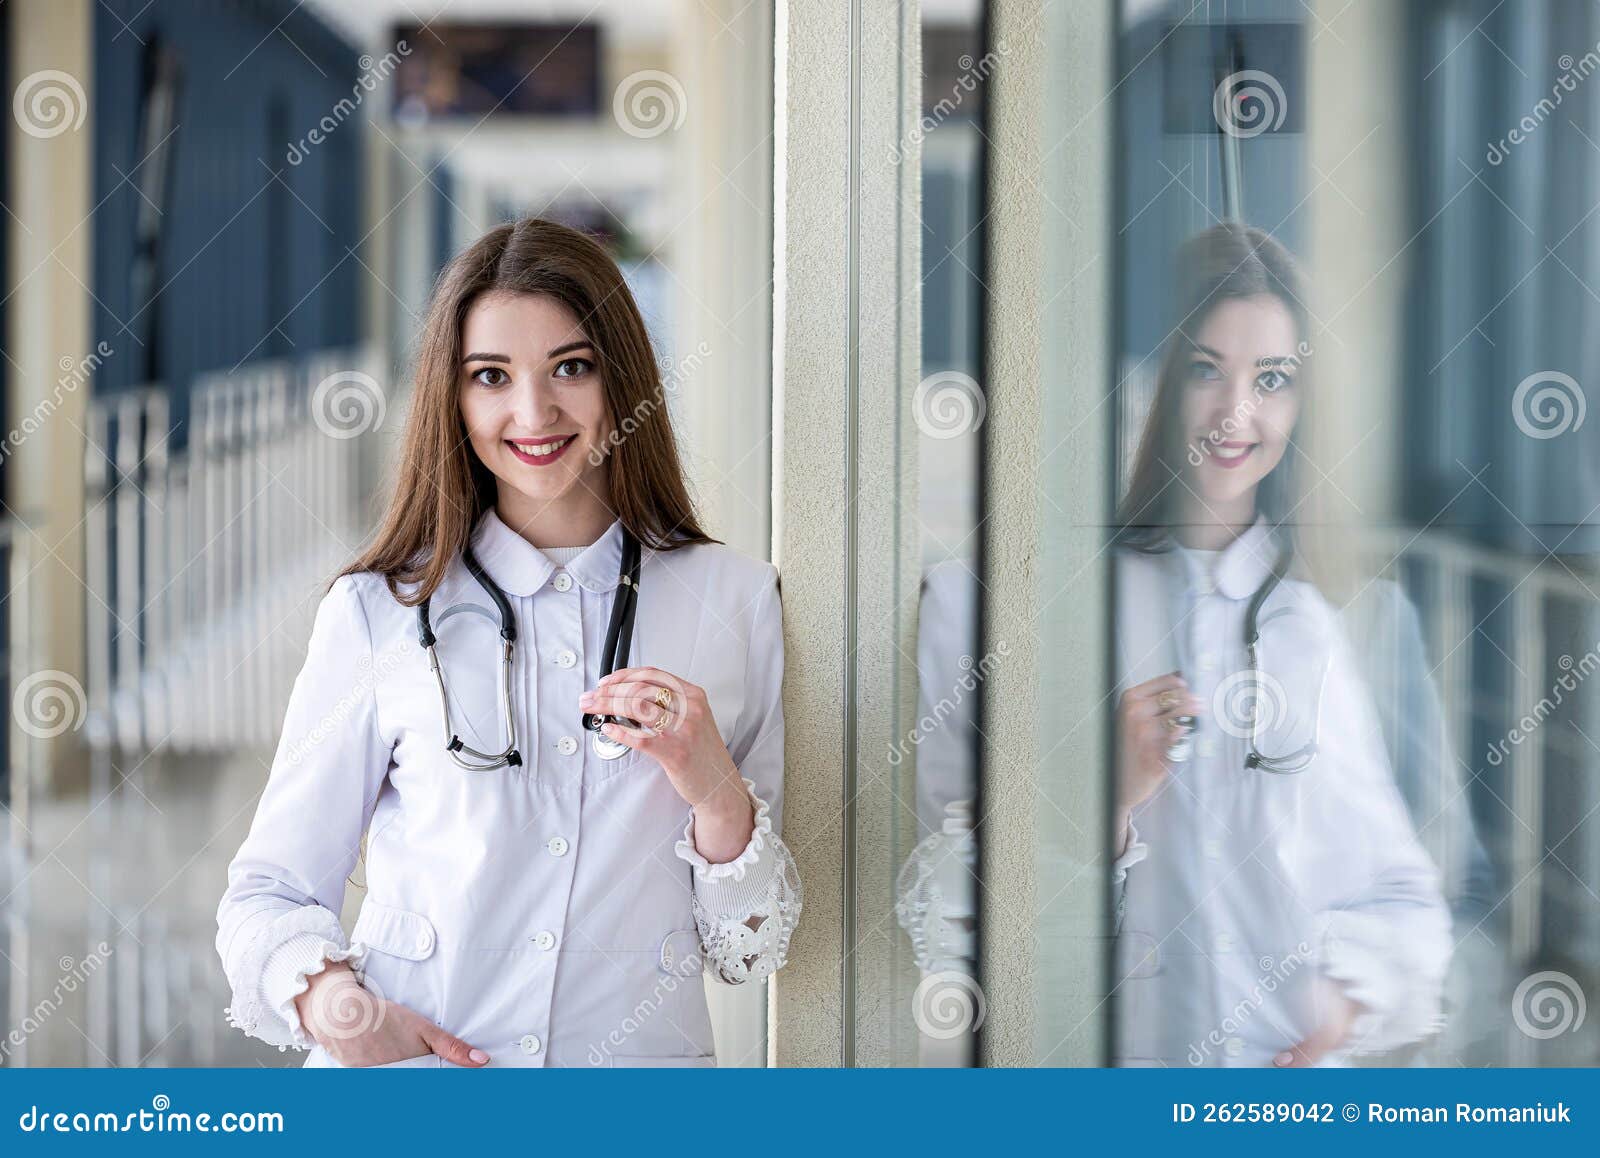 A doctor poses with his stethoscope, 4 August 2006. THE AGE Picture... News  Photo - Getty Images